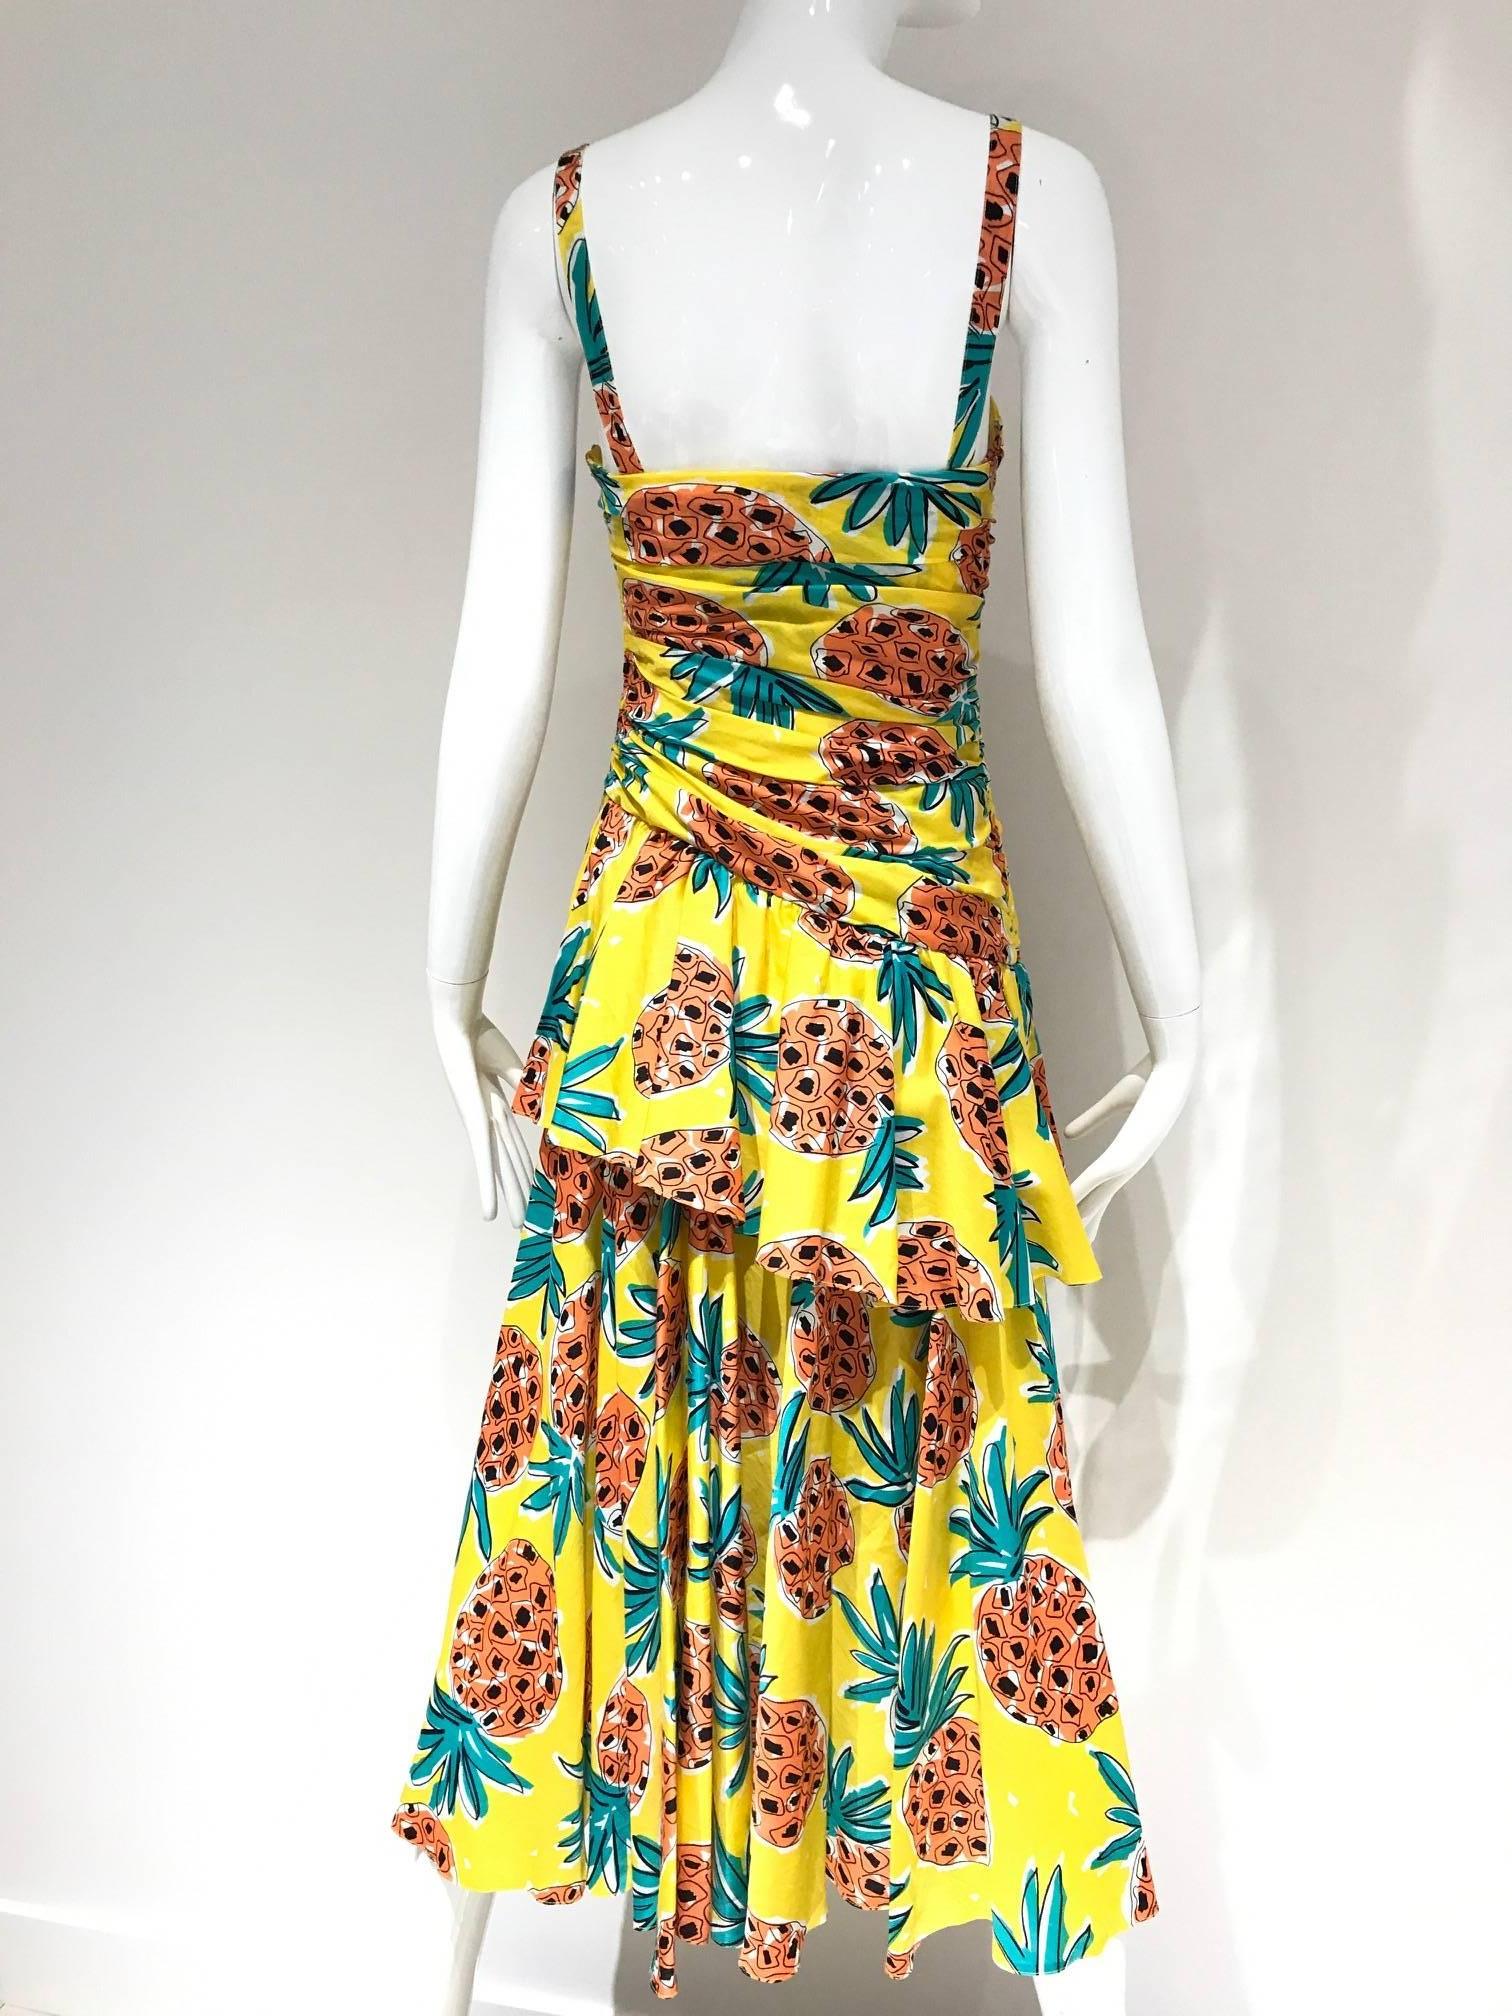 What a fun summer dress. Vintage Louis Feraud yellow pineapple print cotton dress.
Fit size 2.  Small size 